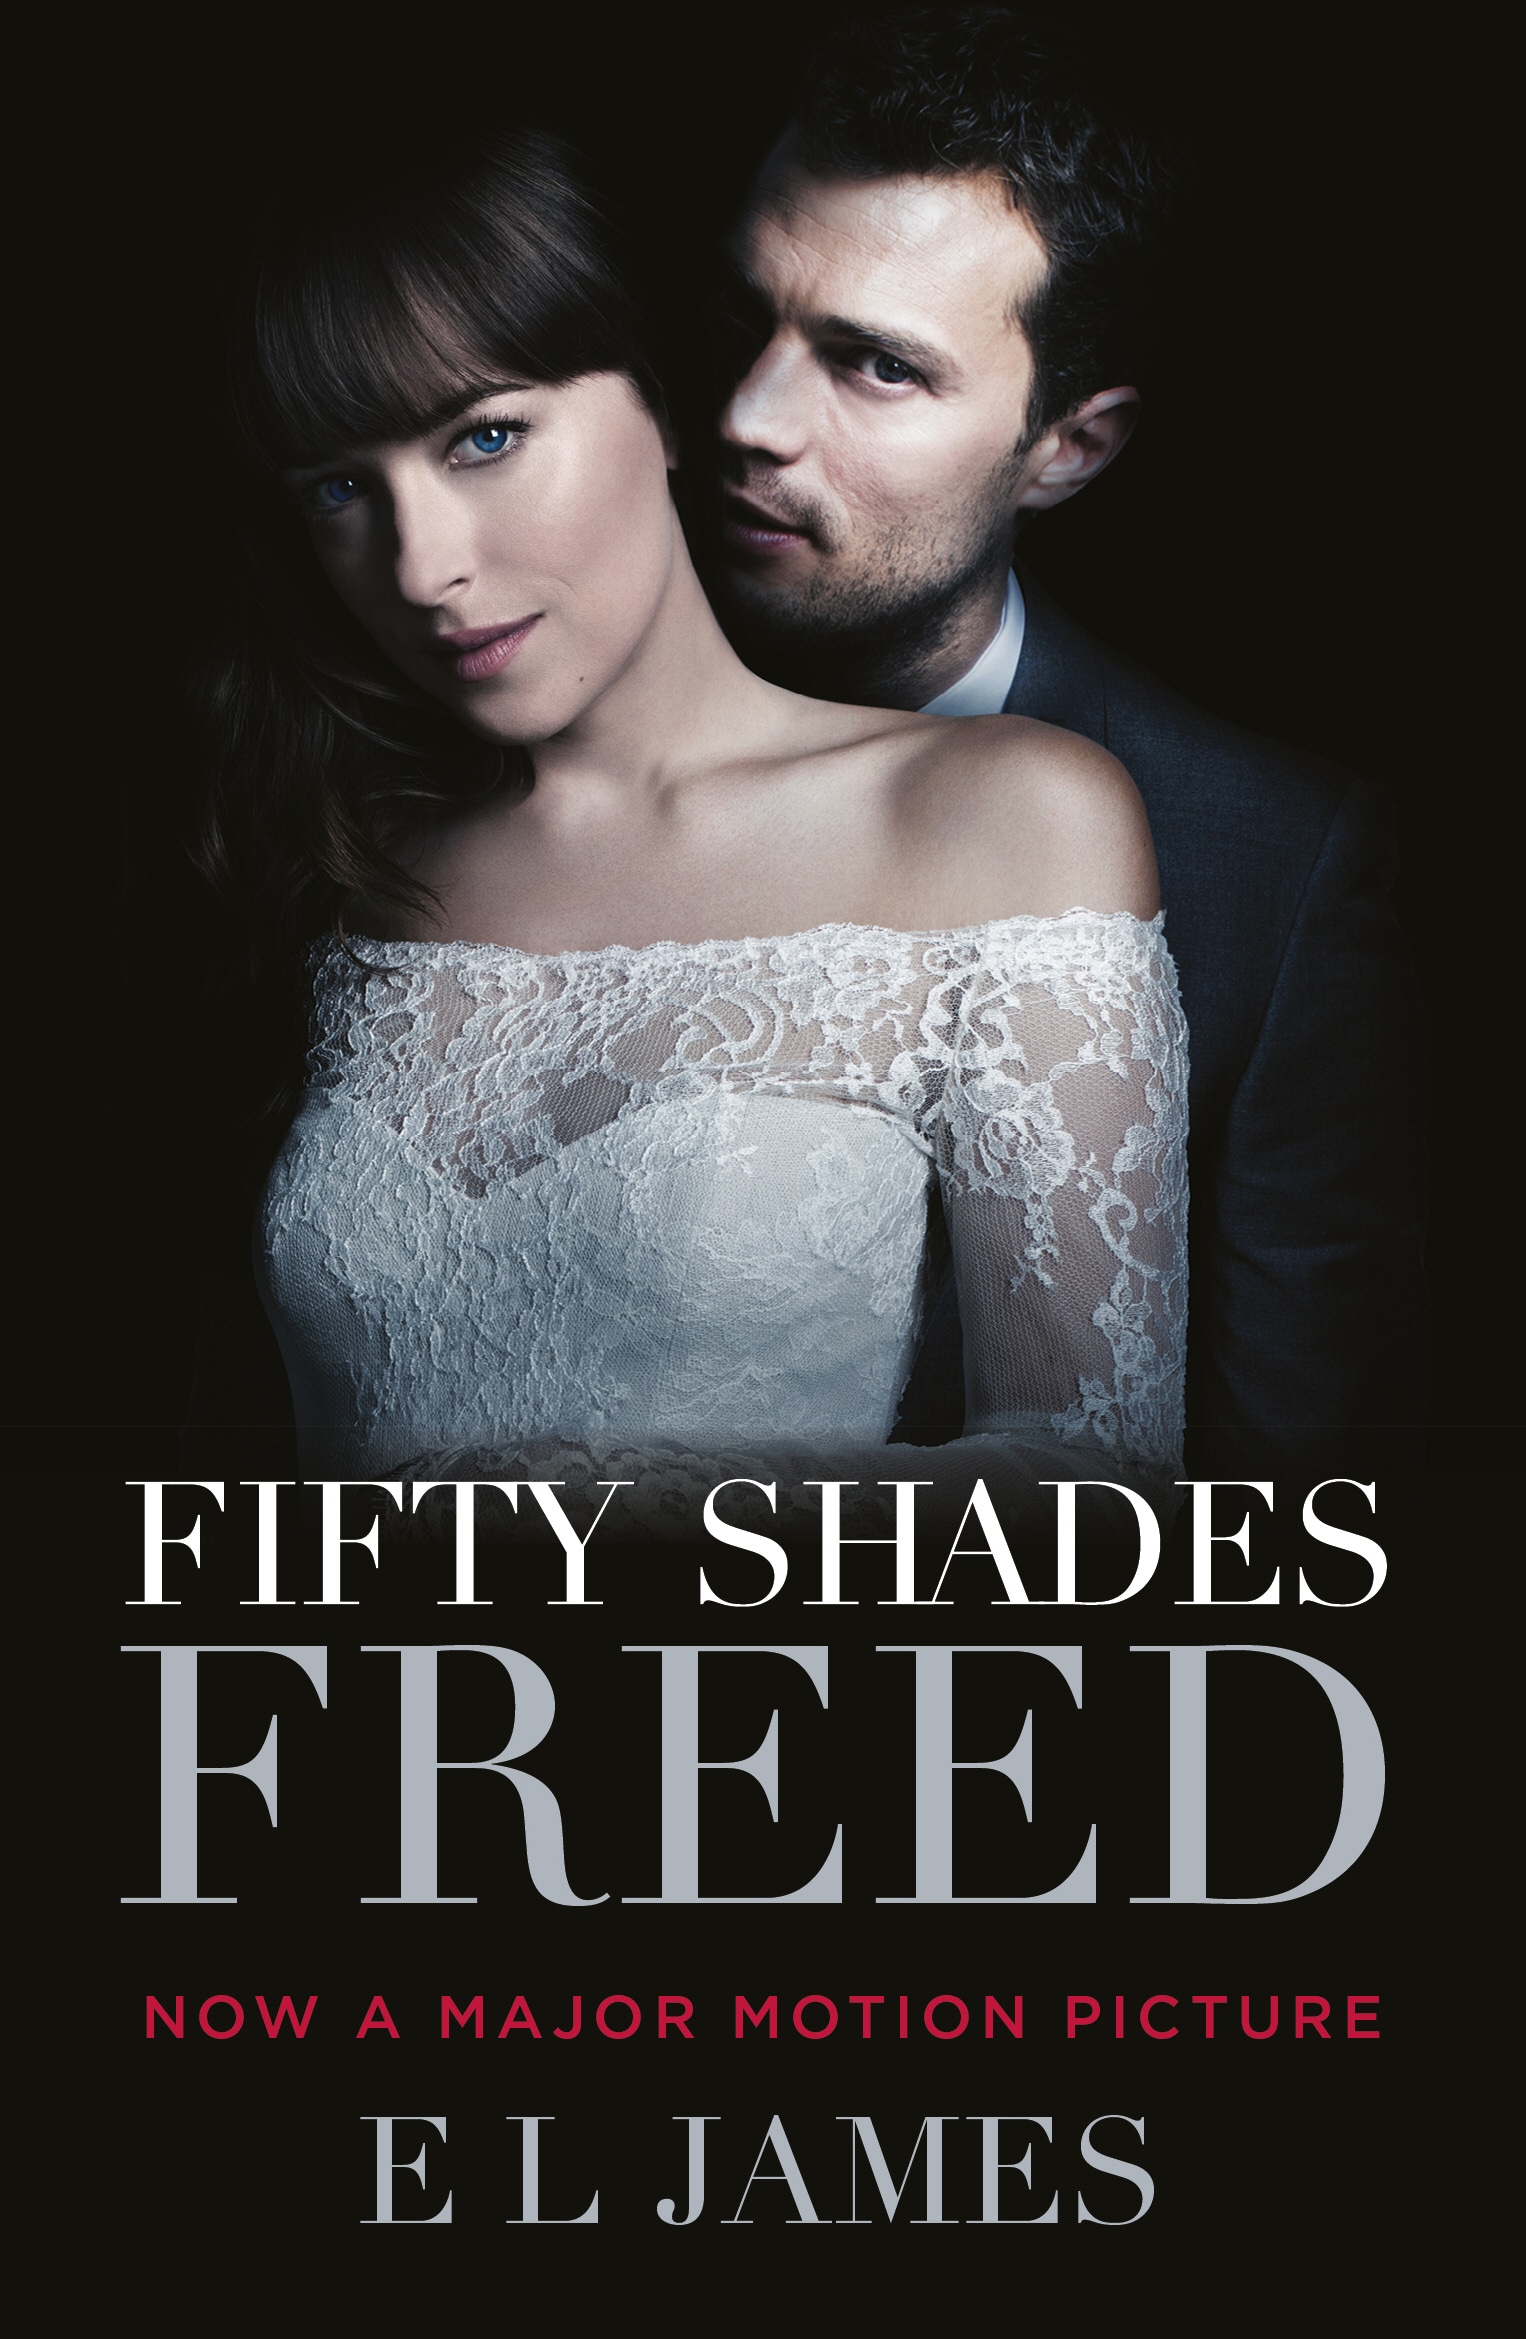 Book “Fifty Shades Freed” by E L James — January 16, 2018